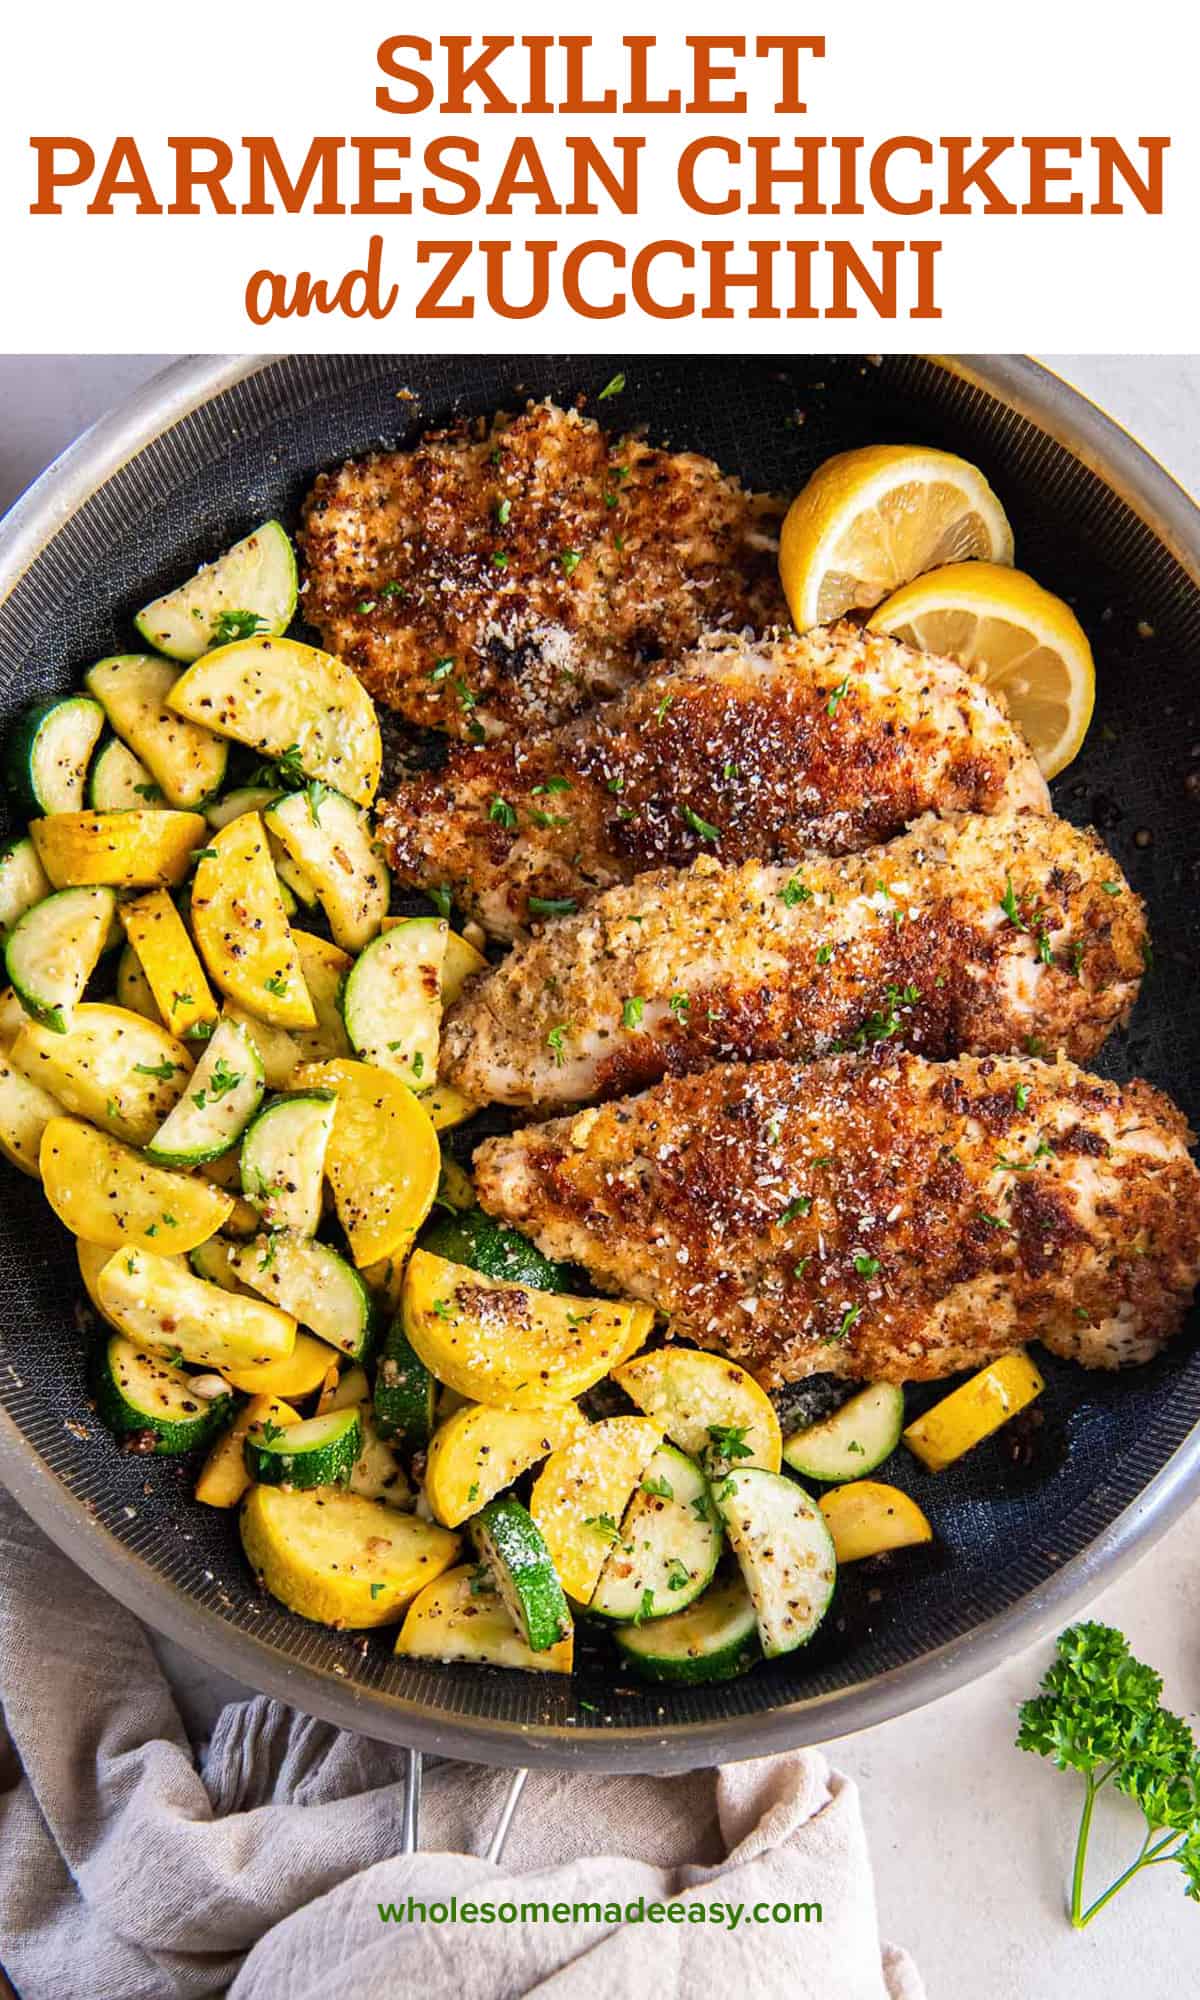 Crispy chicken in a skillet with green and yellow zucchini and lemon slices with text.